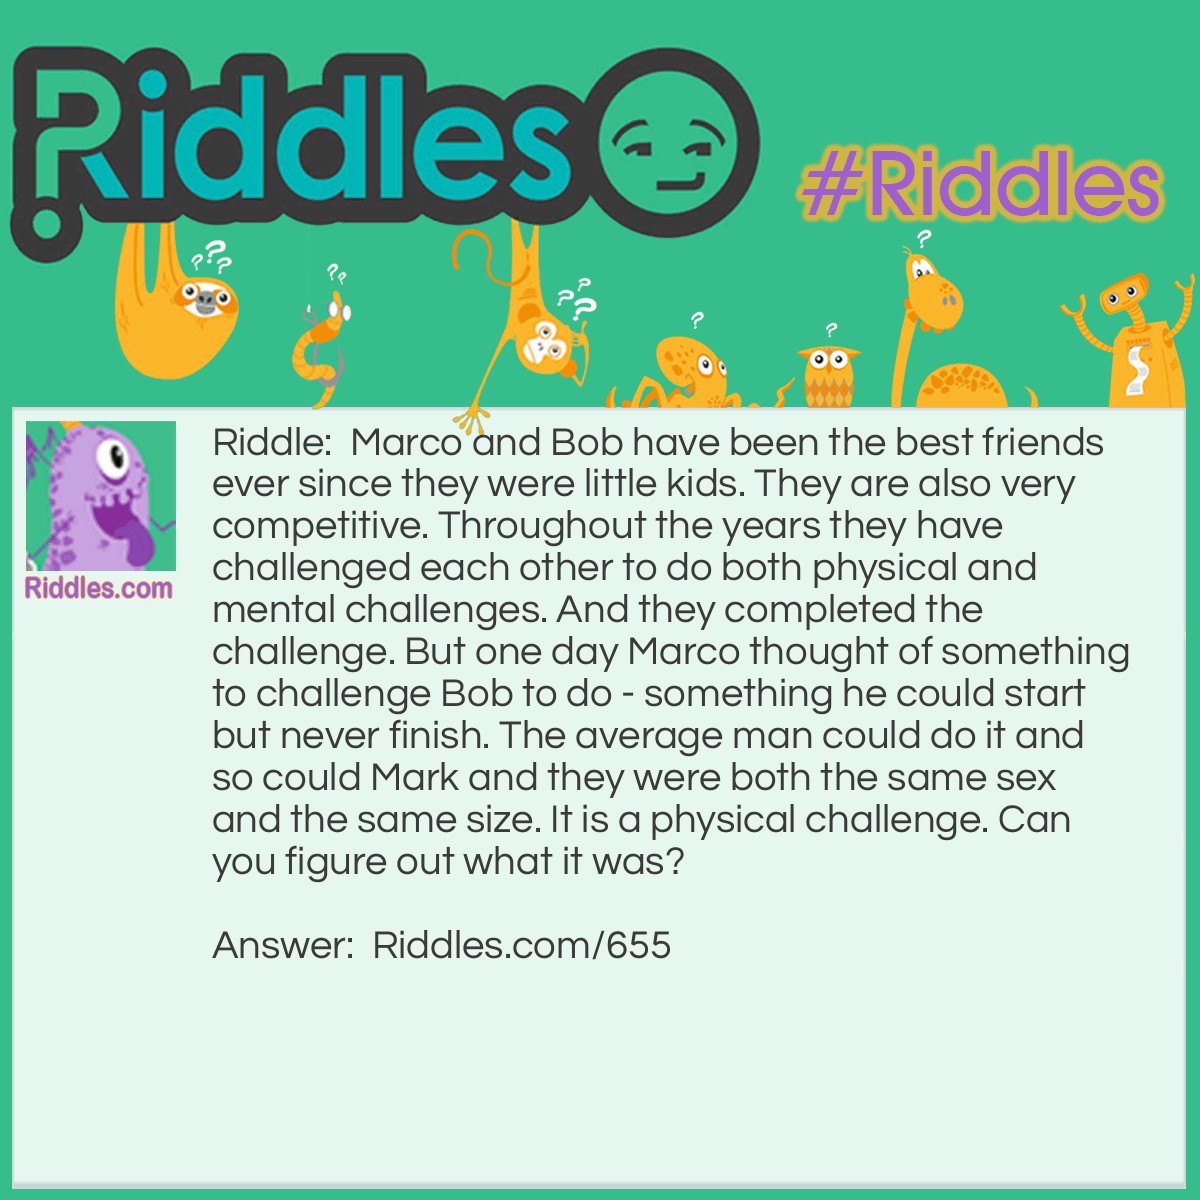 Riddle: Marco and Bob have been the best friends ever since they were <a href="https://www.riddles.com/riddles-for-kids">little kids</a>. They are also very competitive. Throughout the years they have challenged each other to do both physical and mental challenges. And they completed the challenge. But one day Marco thought of something to challenge Bob to do - something he could start but never finish. The average man could do it and so could Mark and they were both the same sex and the same size. It is a physical challenge. Can you figure out what it was? Answer: Marco challenged Bob to get a tan, but he couldn't...Bob is an albino.